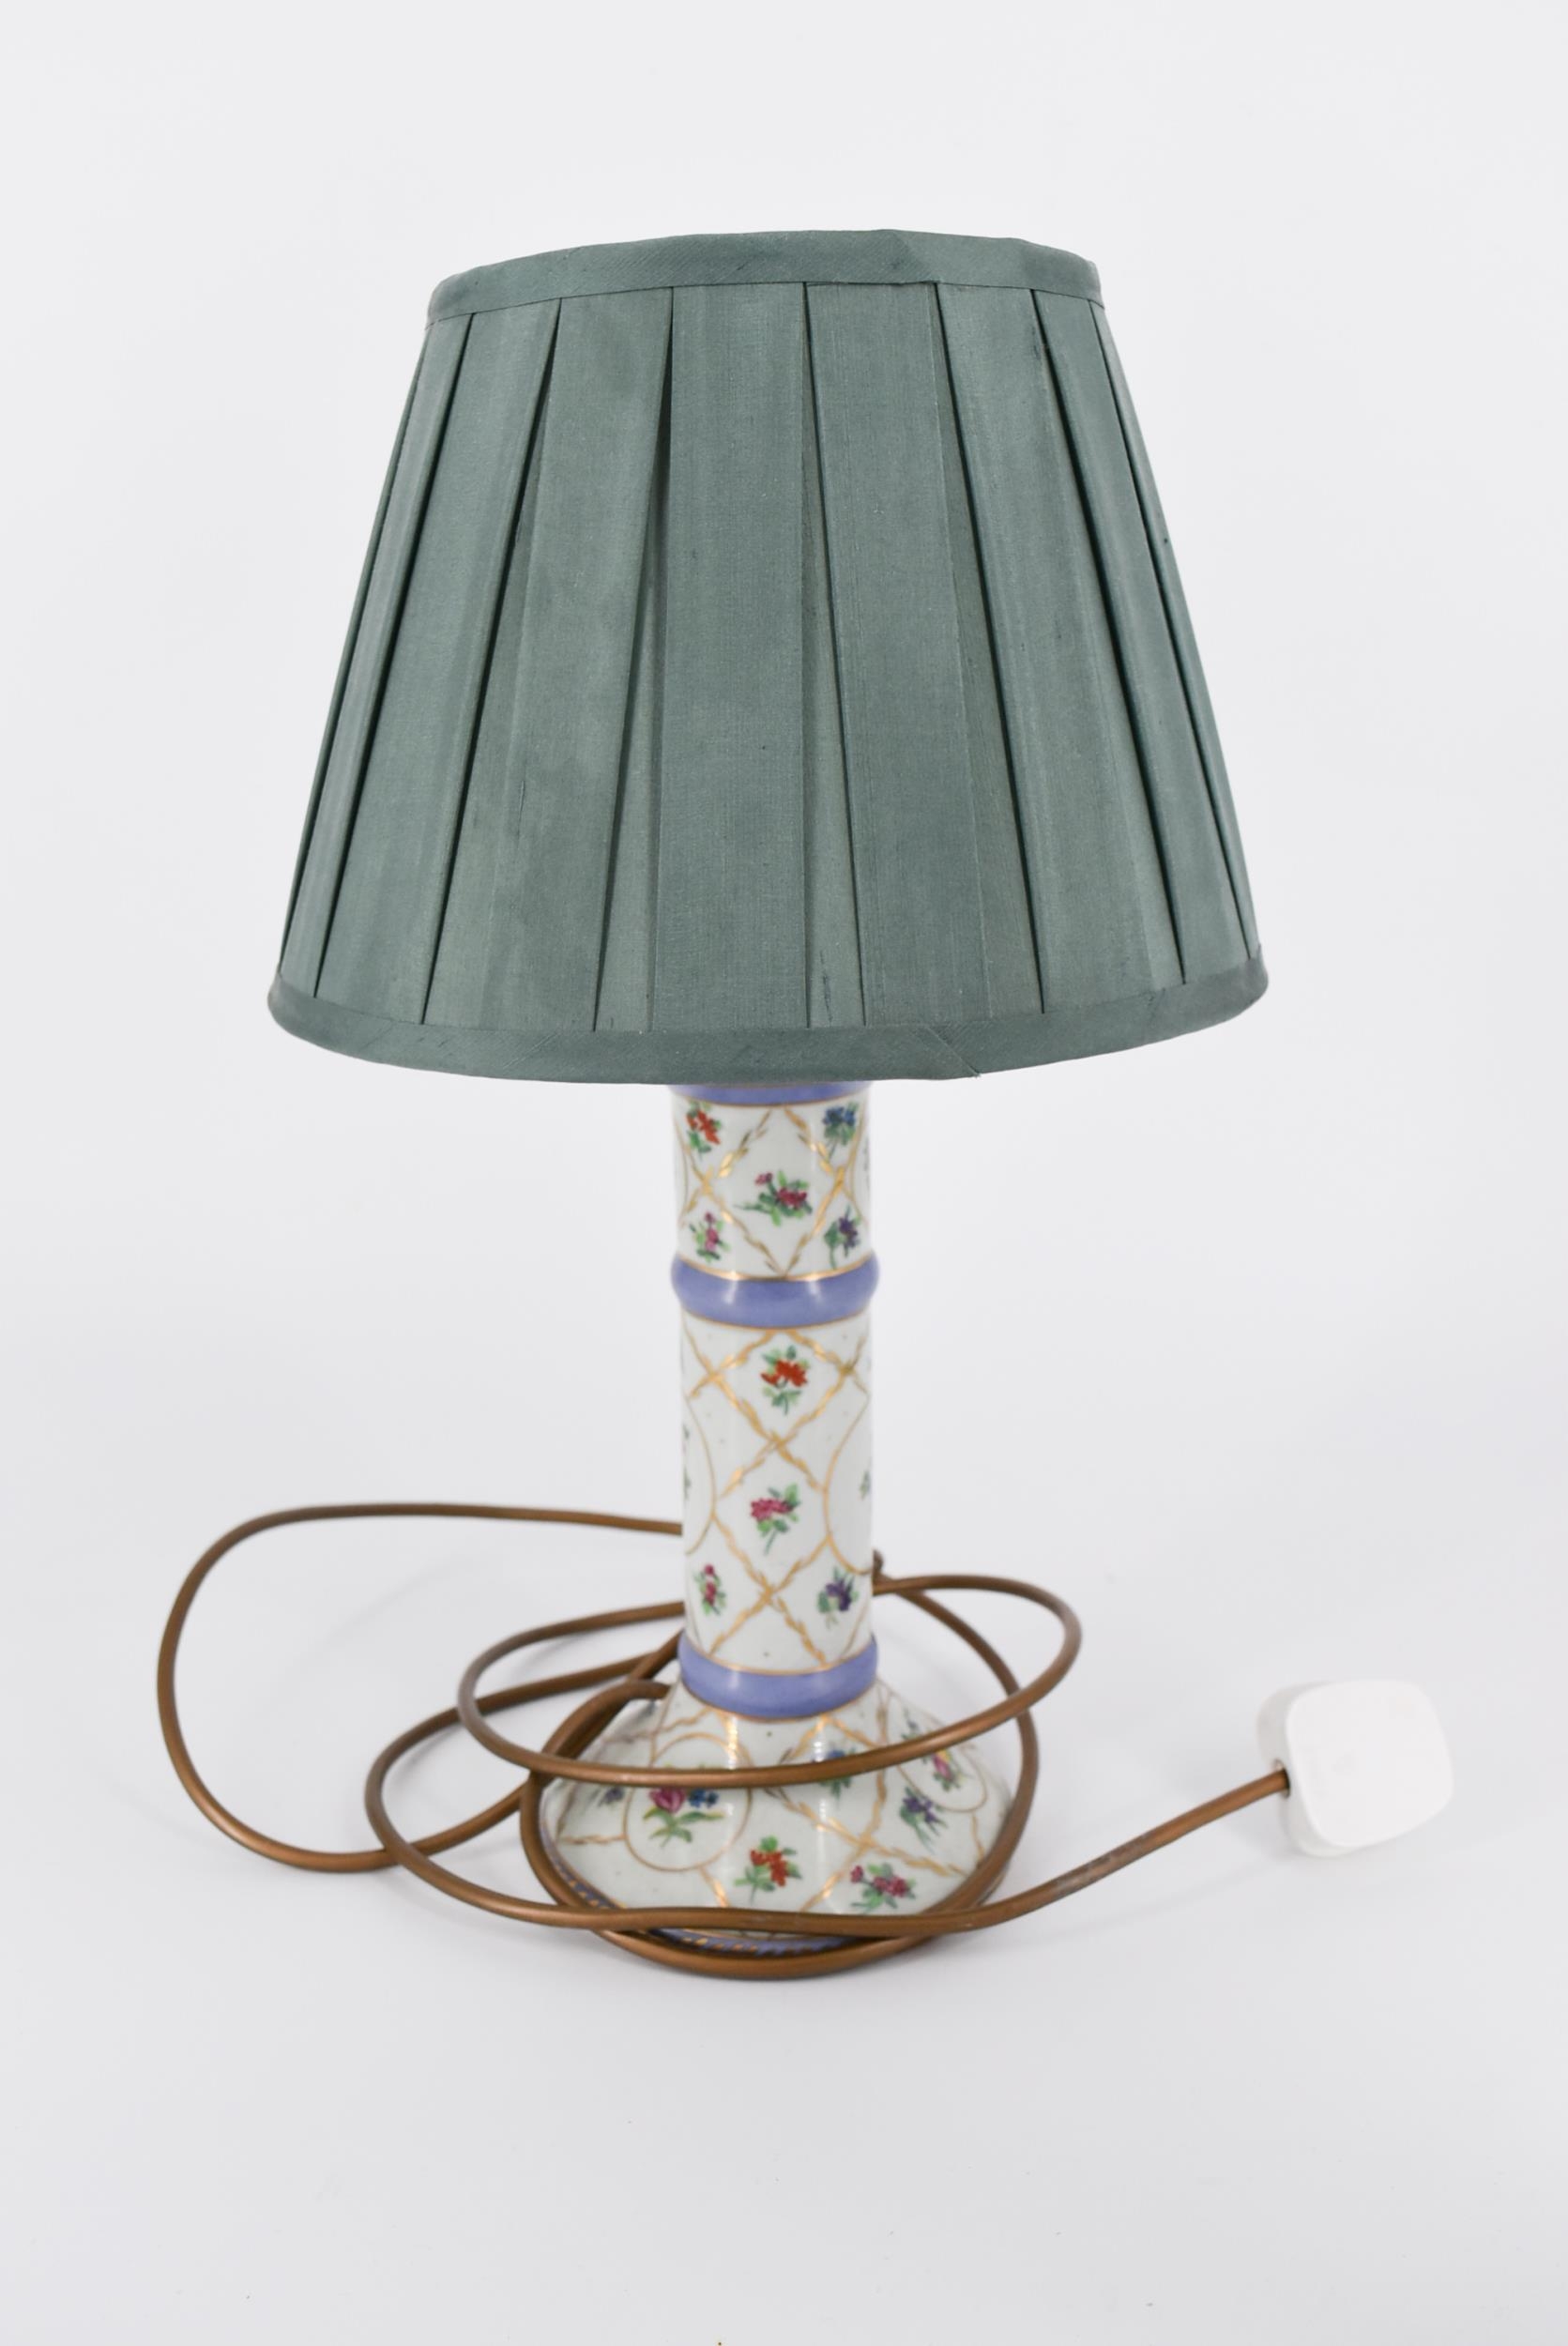 A hand painted floral design porcelain table lamp along with a moulded resin elephant form table - Image 4 of 4